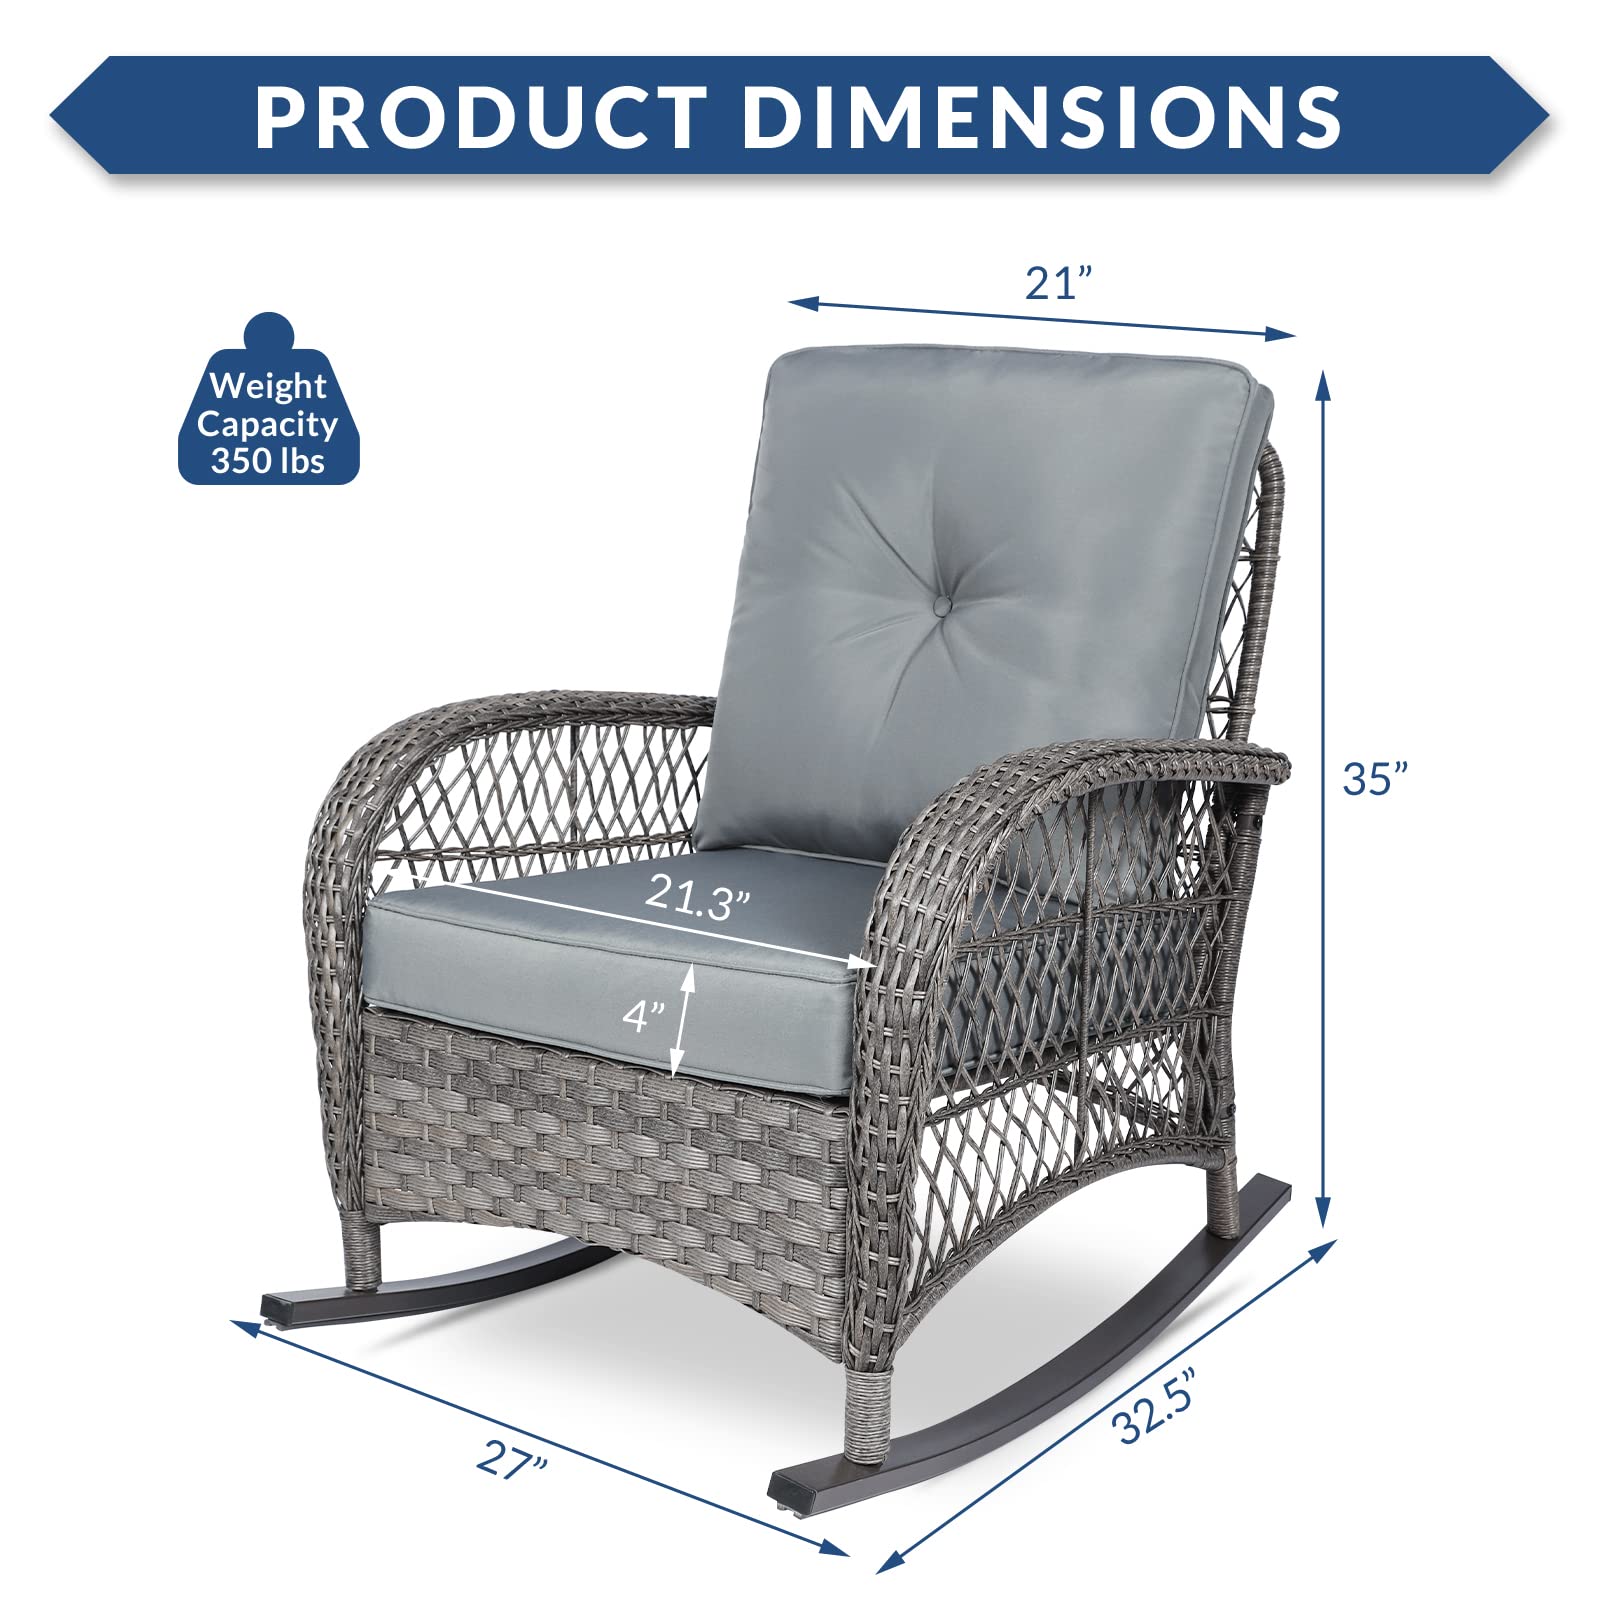 SOCIALCOMFY Outdoor Wicker Rocking Chair, Patio Rattan Rocker Chair with Steel Frame, Rocking Lawn Chair Patio Furniture, Light Brown Wicker & Grey Cushions - image 3 of 7